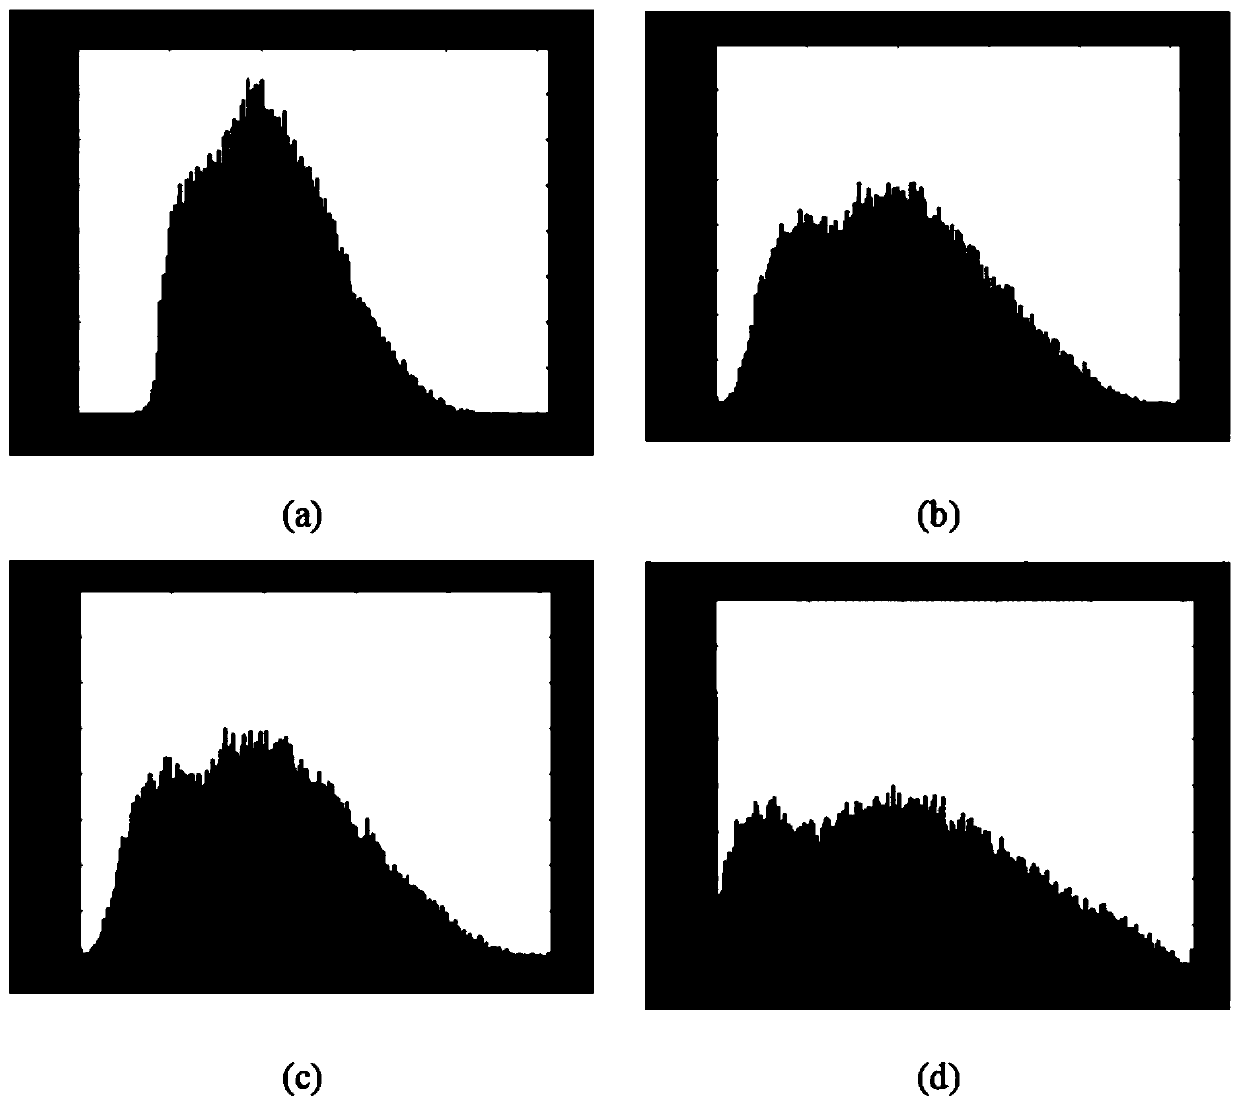 A Shallow Sea Underwater Image Enhancement Method Based on Relative Global Histogram Stretching